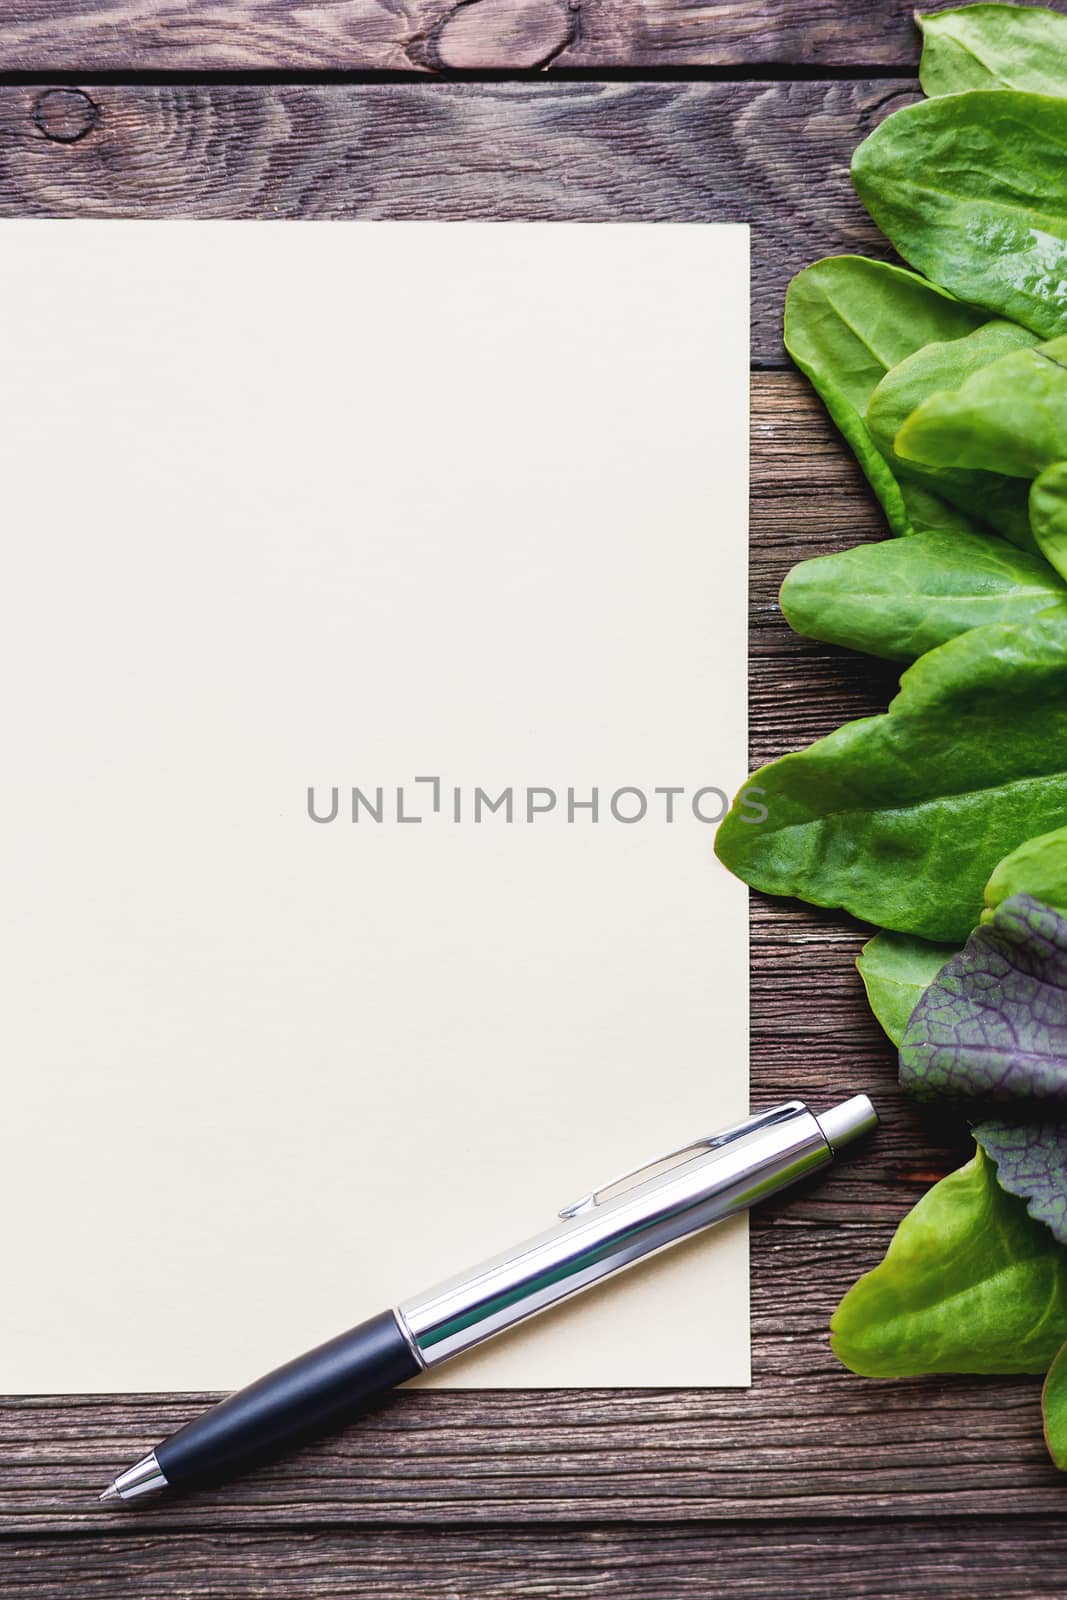 Fresh leaves of sorrel on wooden background. Rustic table with green and violet edible leaves. Place for text.